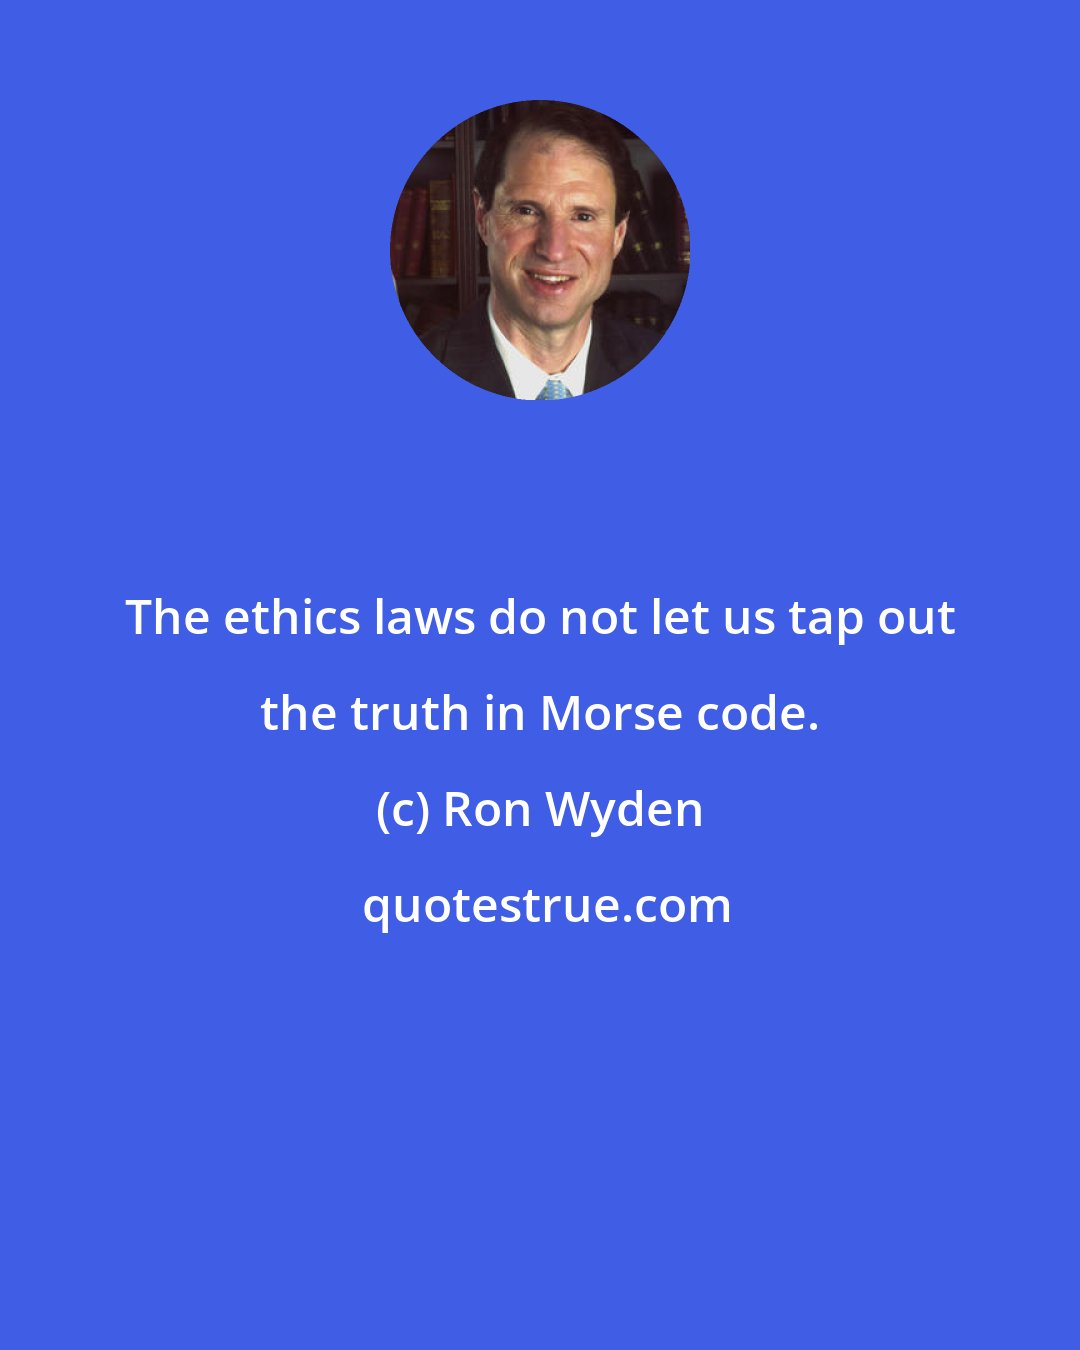 Ron Wyden: The ethics laws do not let us tap out the truth in Morse code.